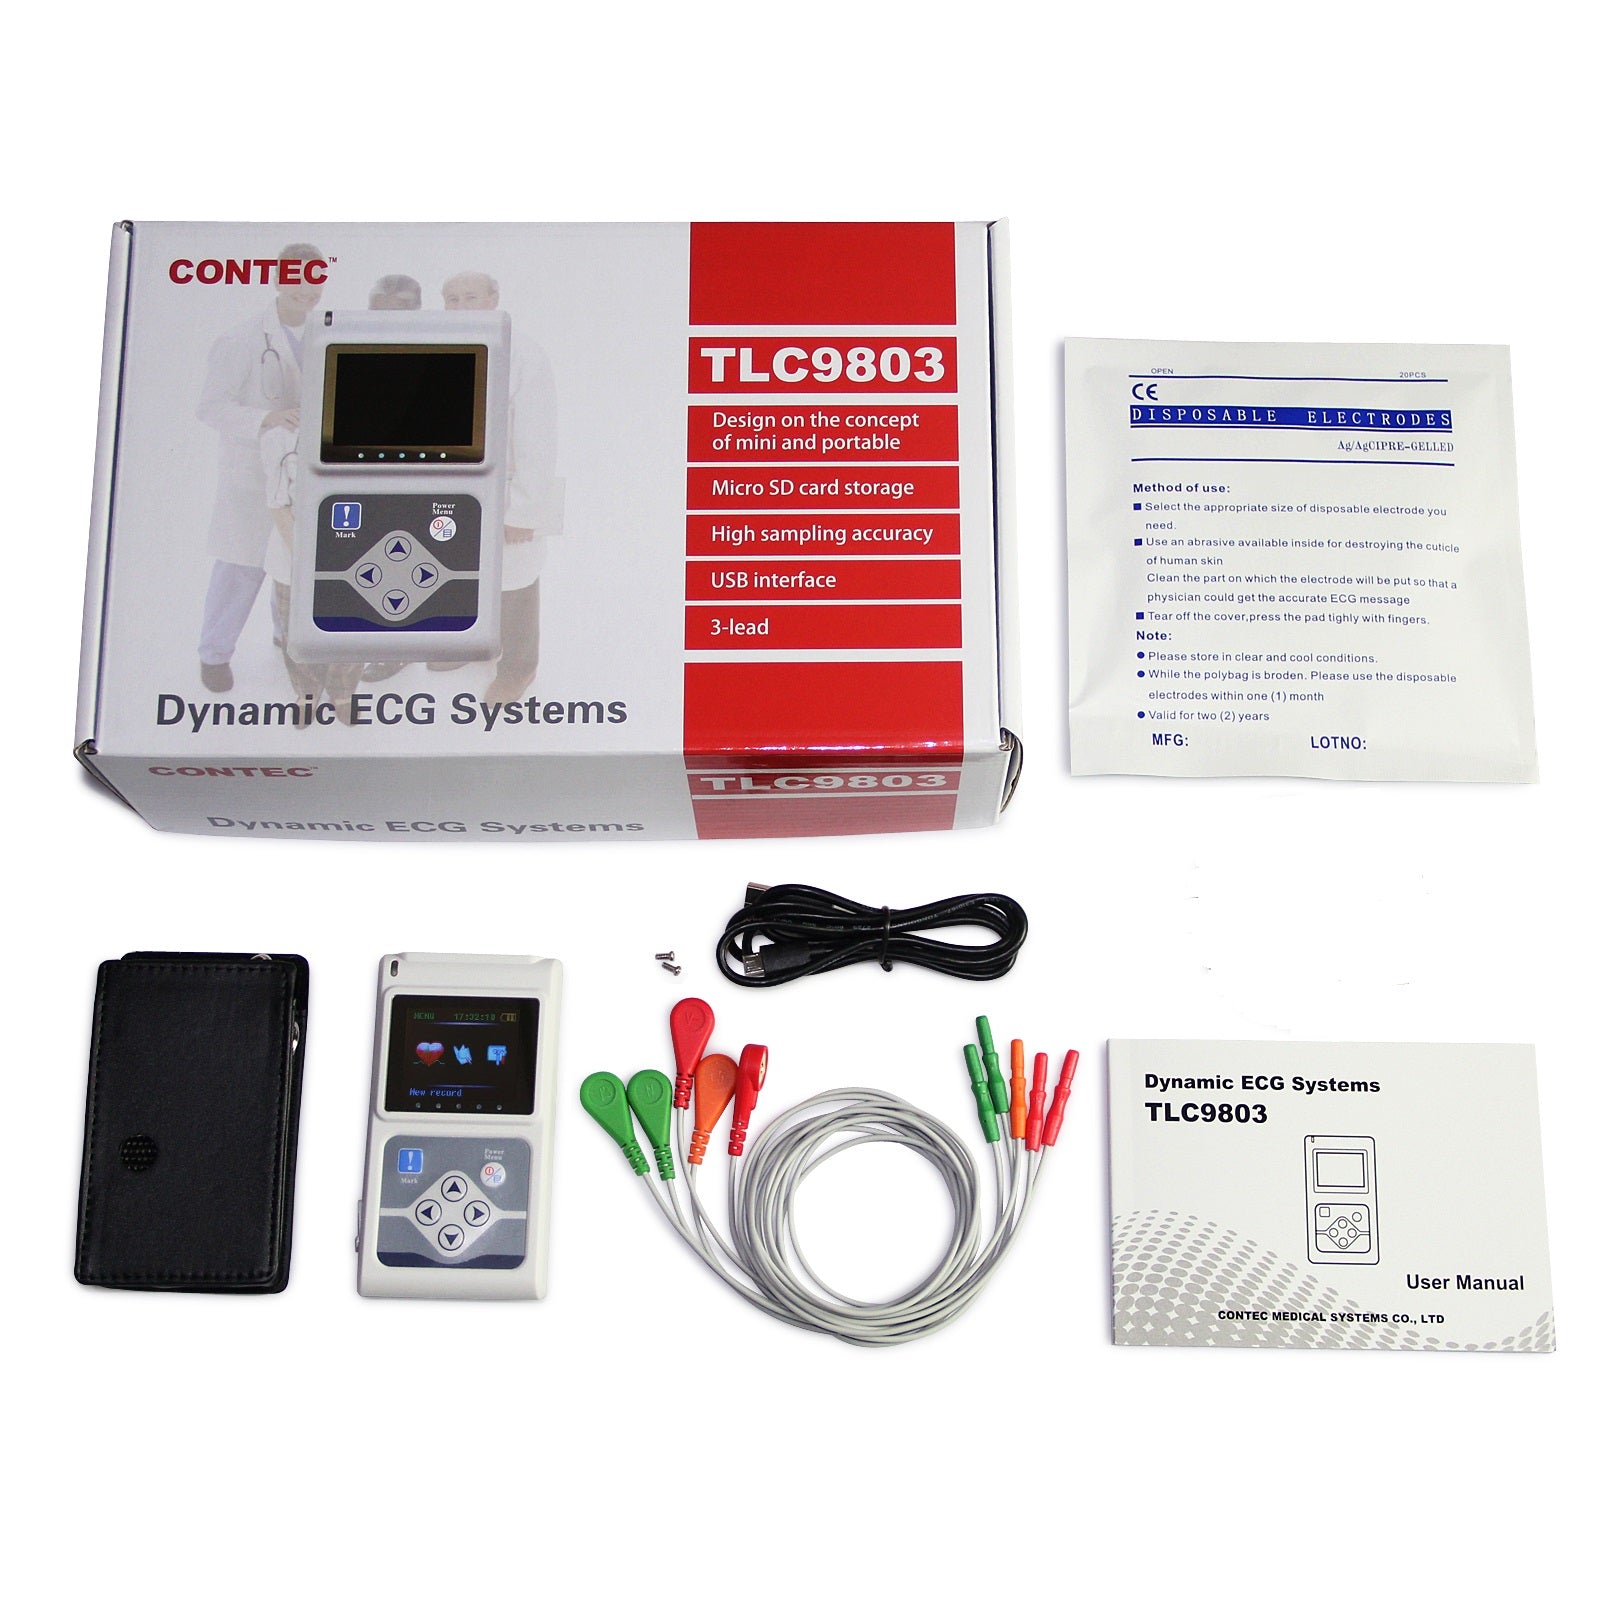 CONTEC NEW ECG Holter 3 Channel 24H Recorder Analyzer TLC9803- Contec ECG Holter 3 channel- CONTEC 3 Channel Holter Price In Pakistan